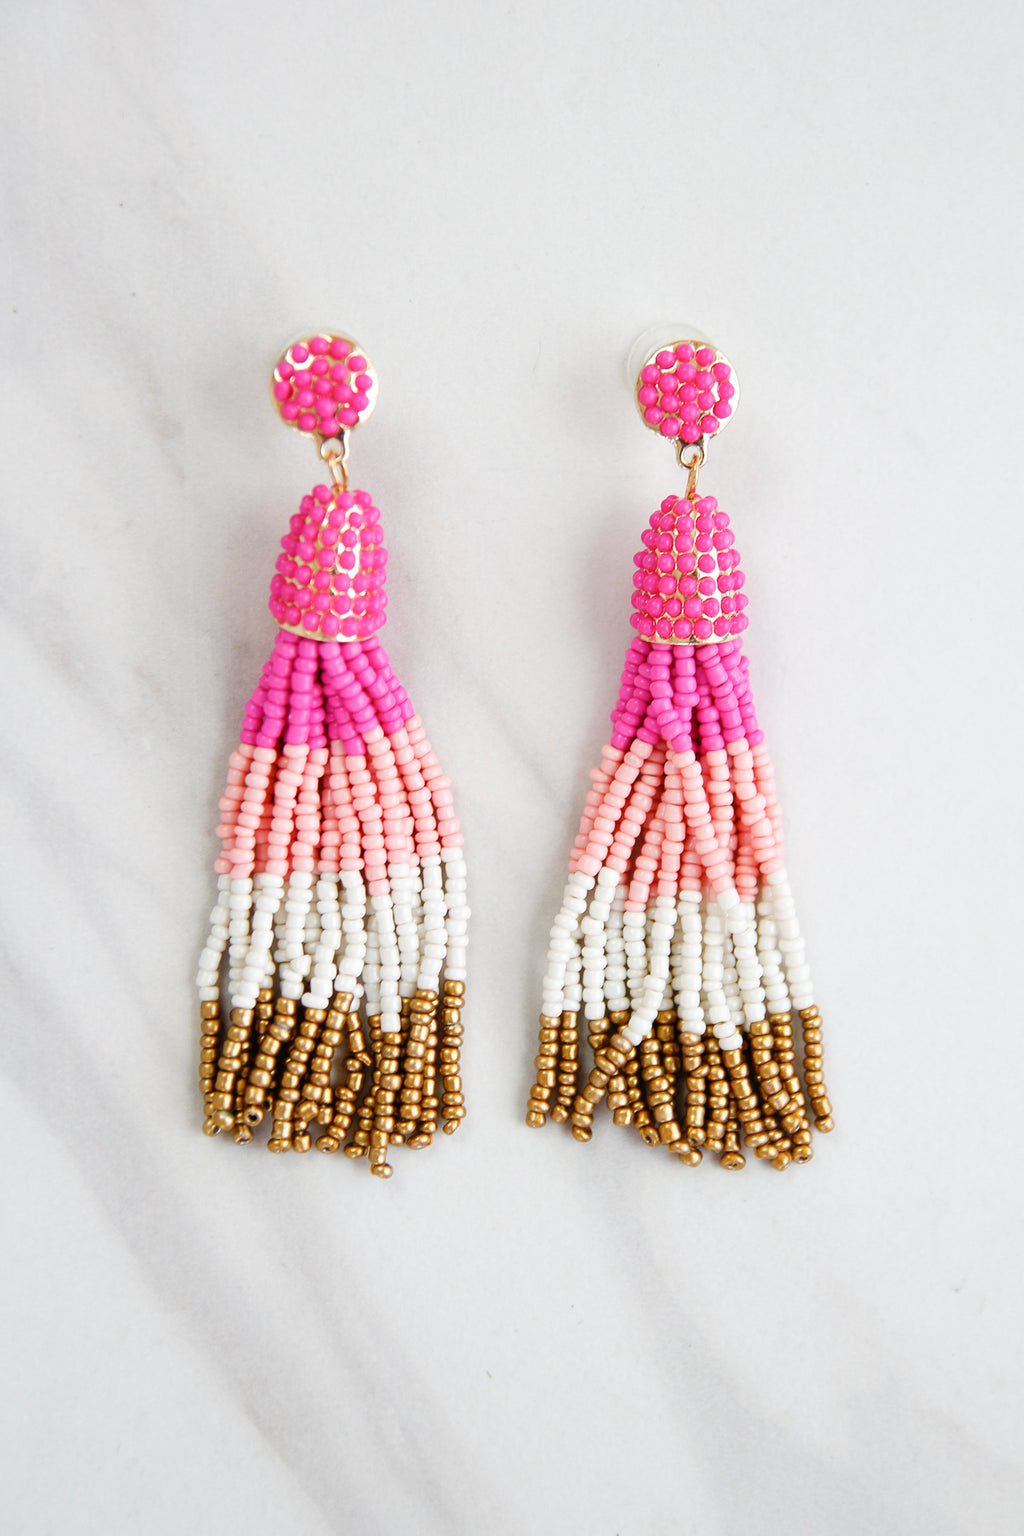 Earrings – The Impeccable Pig